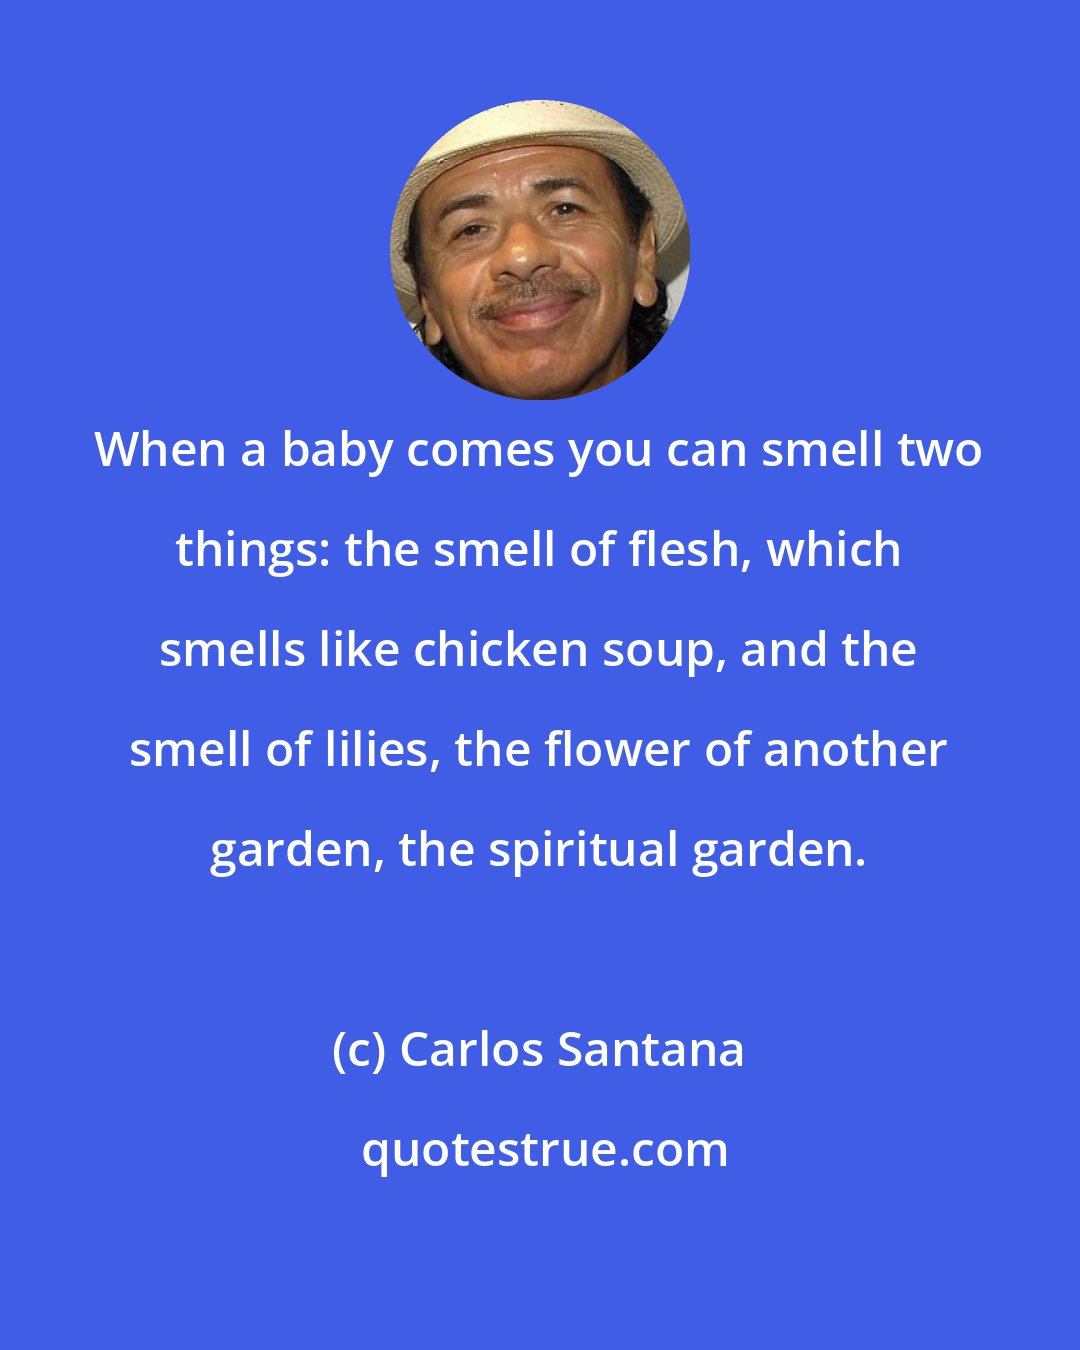 Carlos Santana: When a baby comes you can smell two things: the smell of flesh, which smells like chicken soup, and the smell of lilies, the flower of another garden, the spiritual garden.